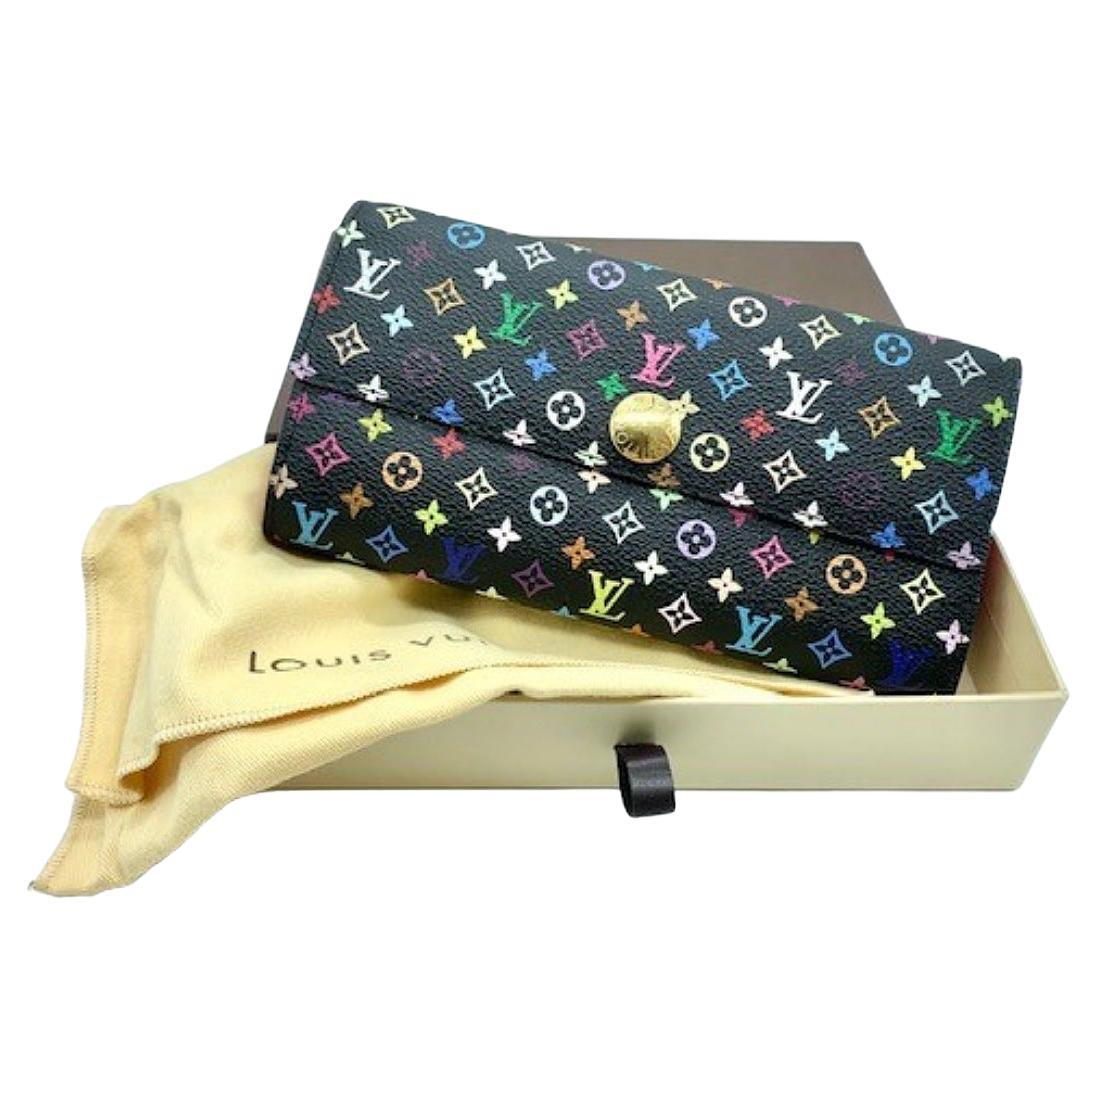 Vintage Louis Vuitton Wallets and Small Accessories - 978 For Sale 